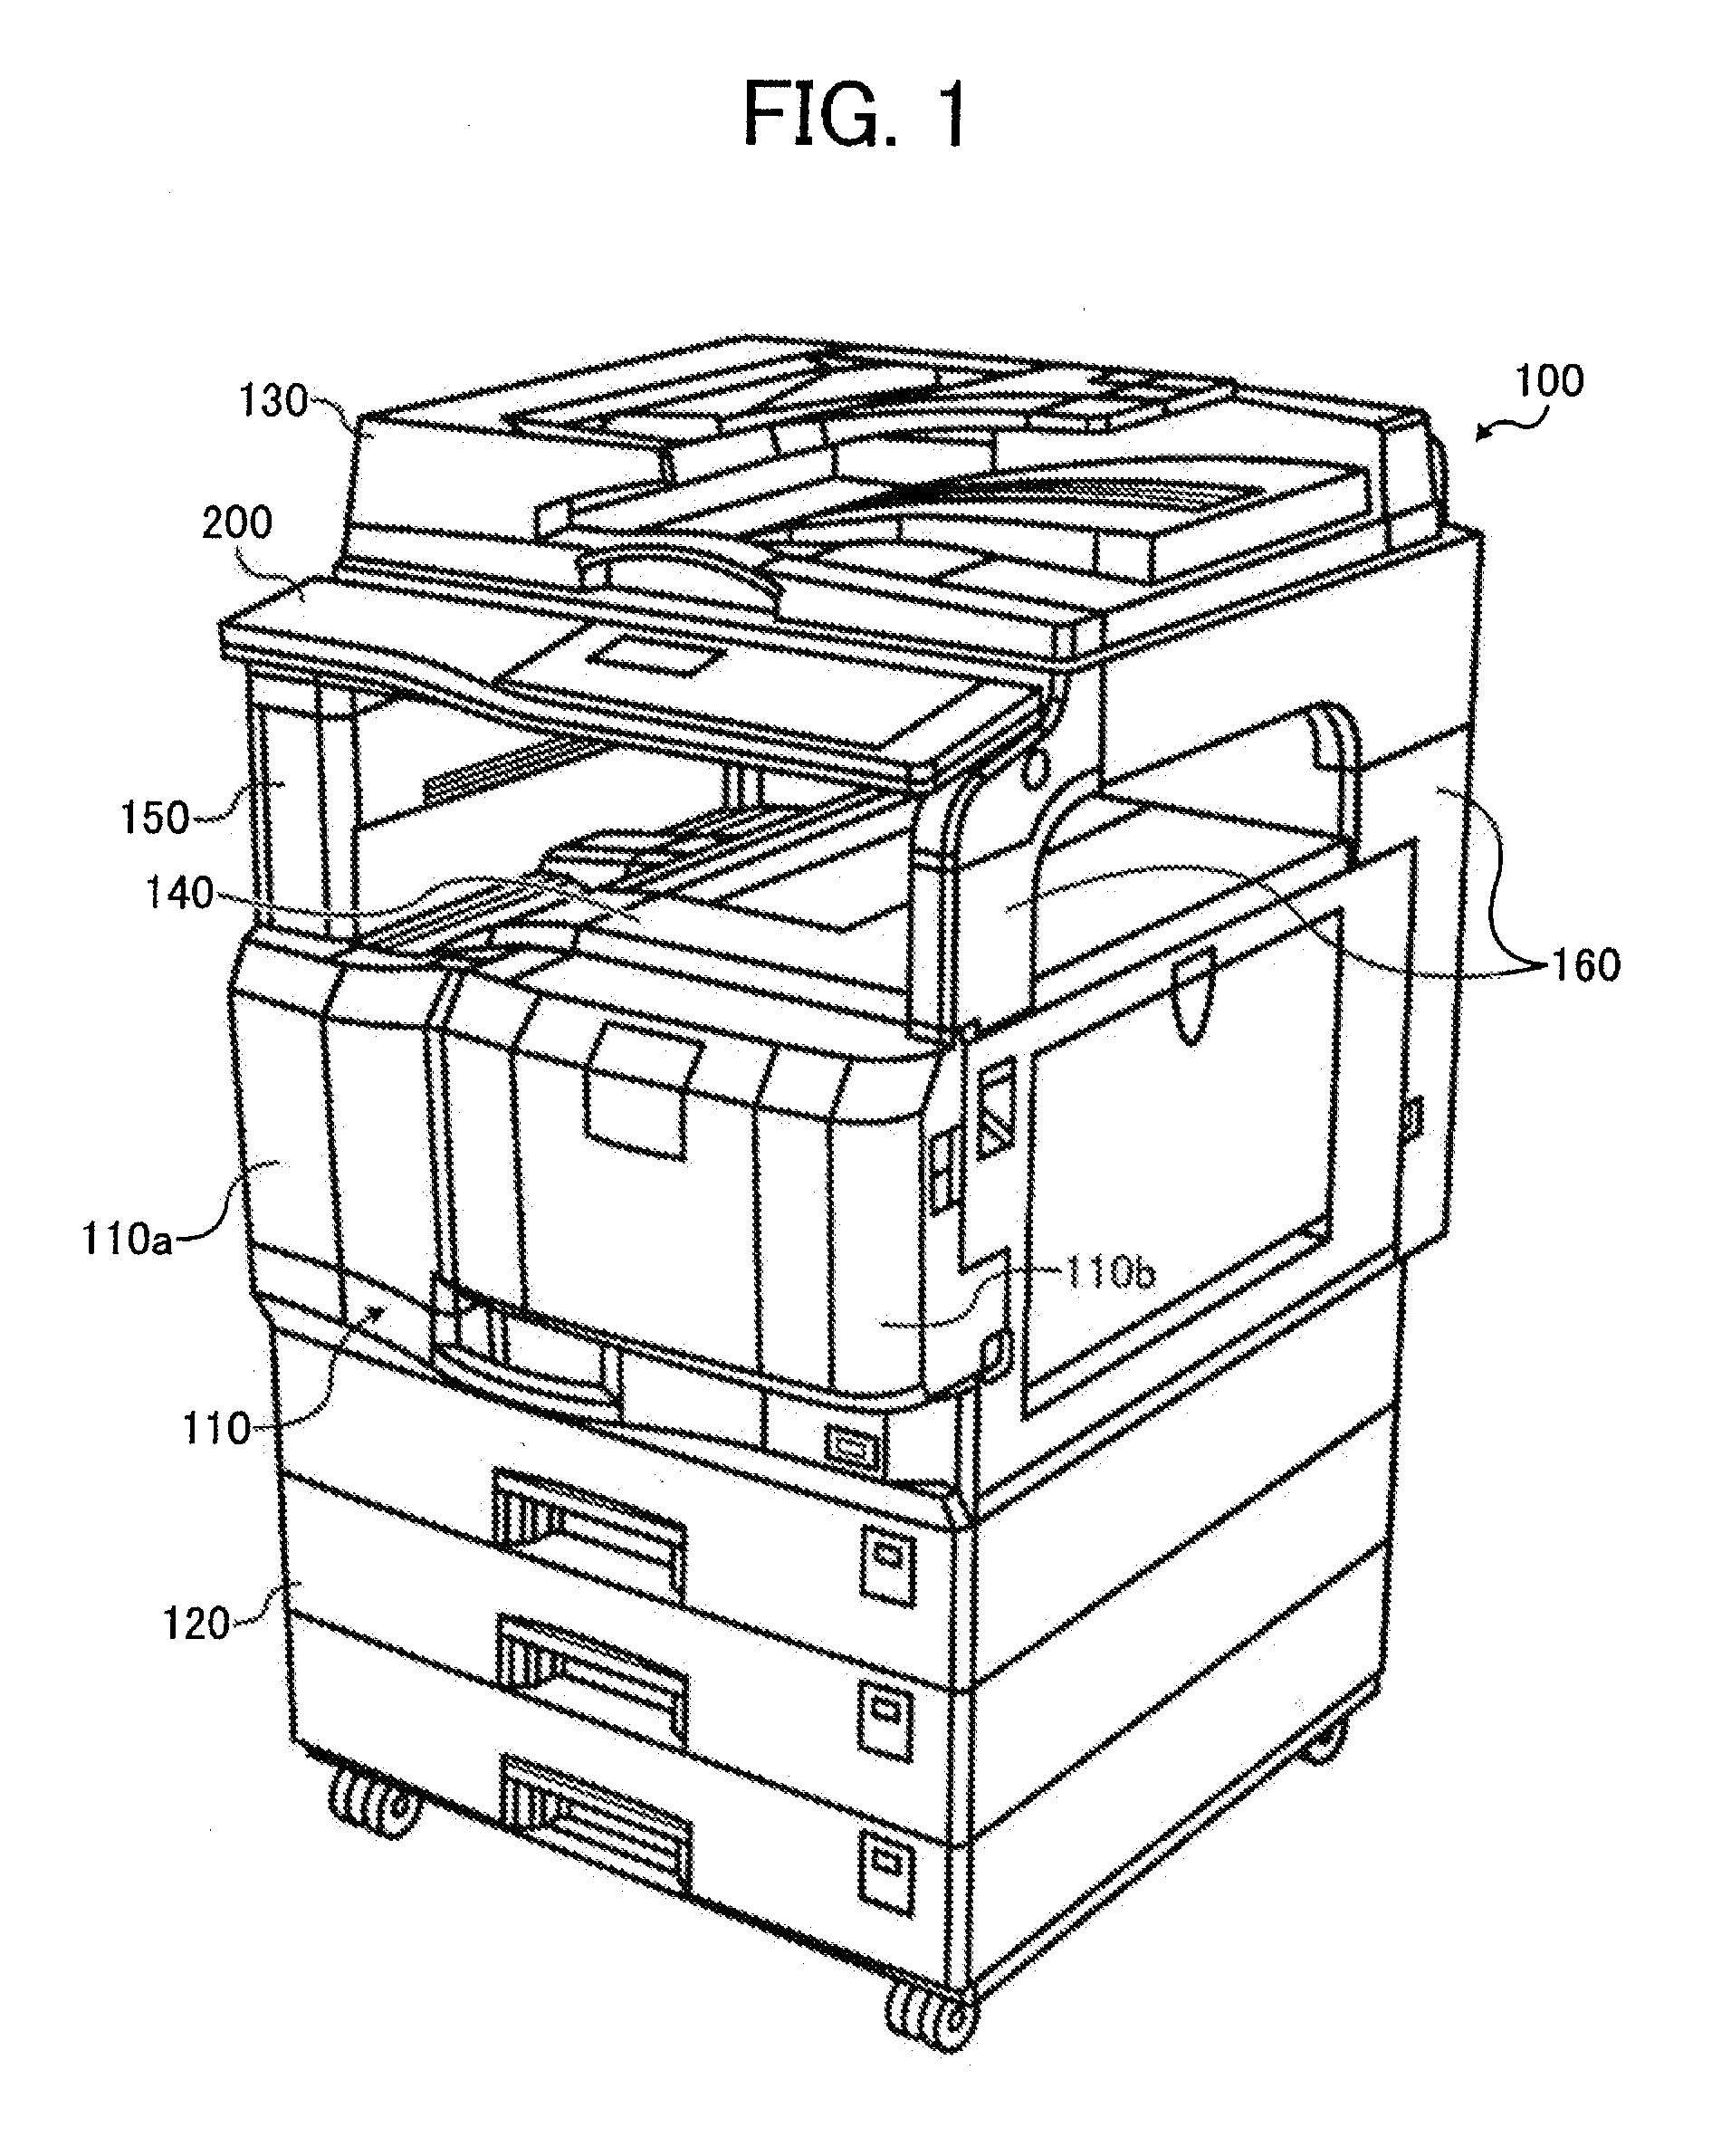 Image forming apparatus with multiple doors